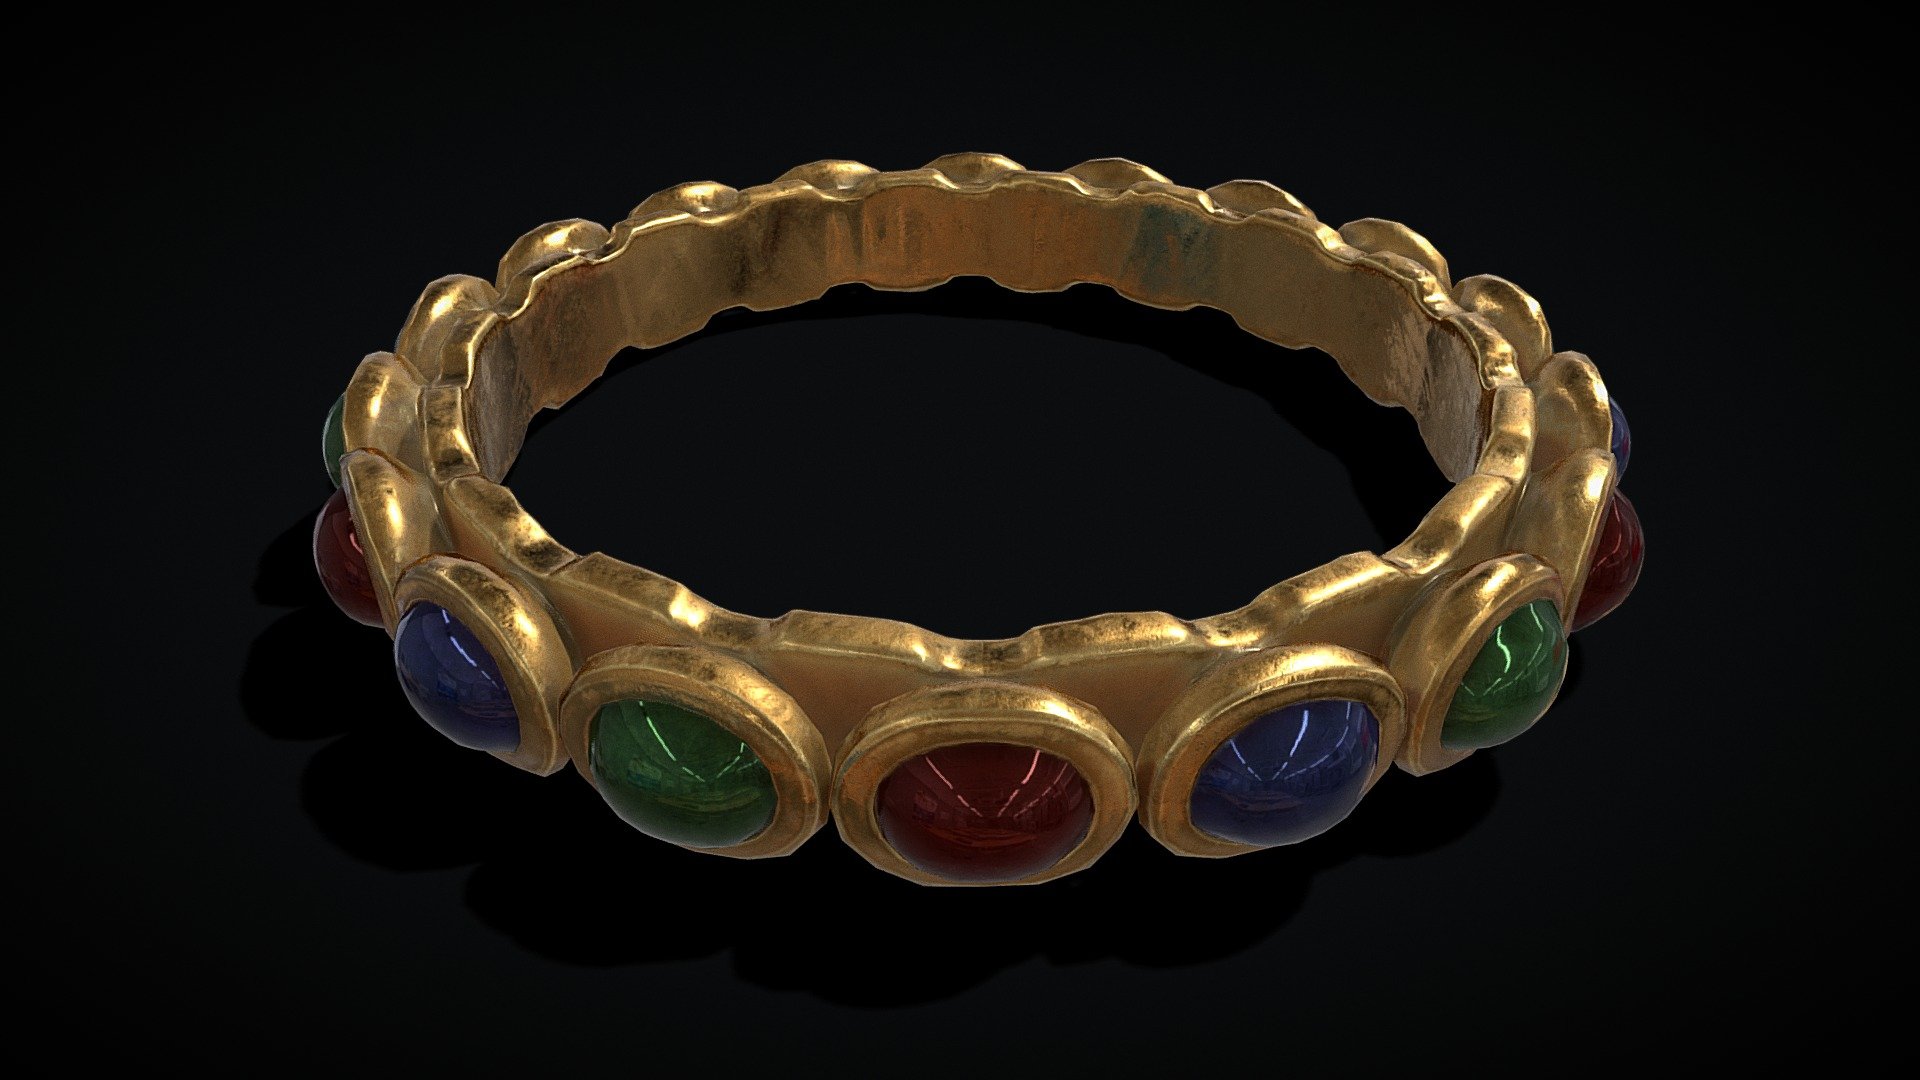 Gold Jeweled Bracelet 
VR / AR / Low-poly
PBR approved
Geometry Polygon mesh
Polygons 9,288
Vertices 8,892
Textures 4K
Materials 1 - Gold Jeweled Bracelet - Buy Royalty Free 3D model by GetDeadEntertainment 3d model